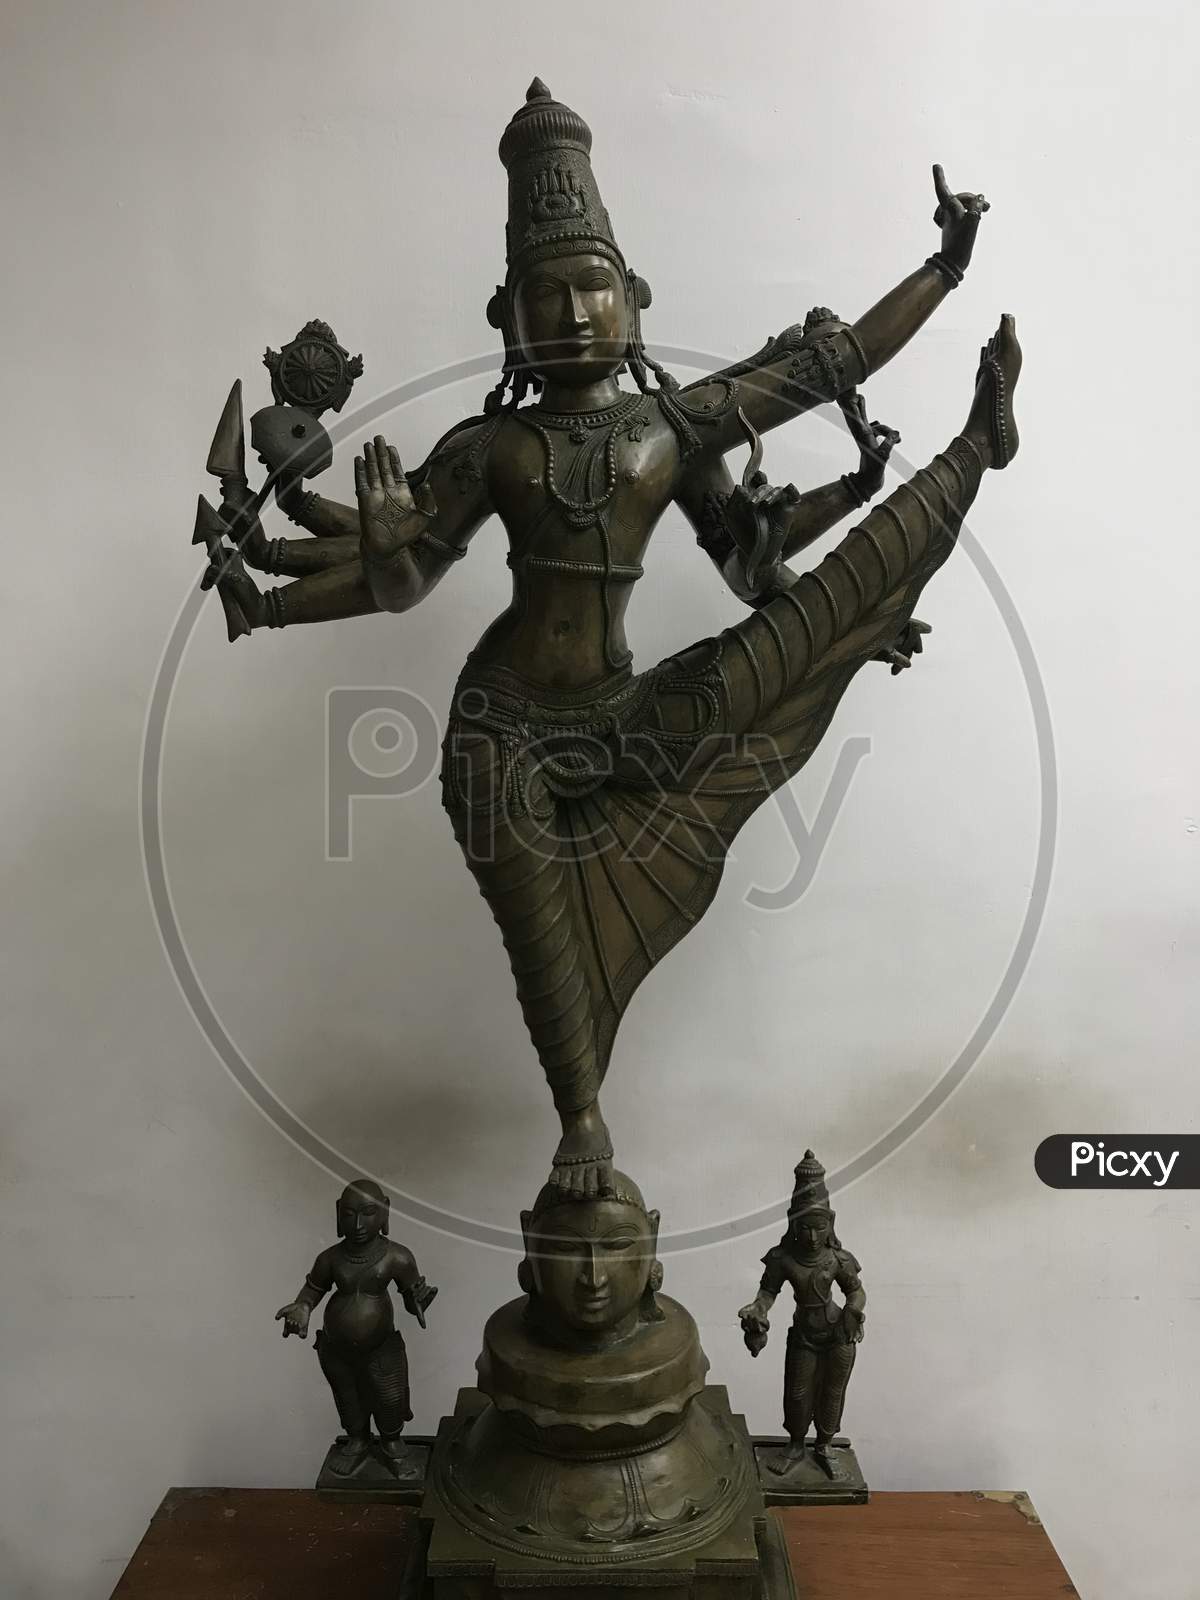 Statue Of Two Ladies Playing Ancient Tamil Games And Grandmother Statue Doing House Chores And Beautiful Status Are Located In Chennai India